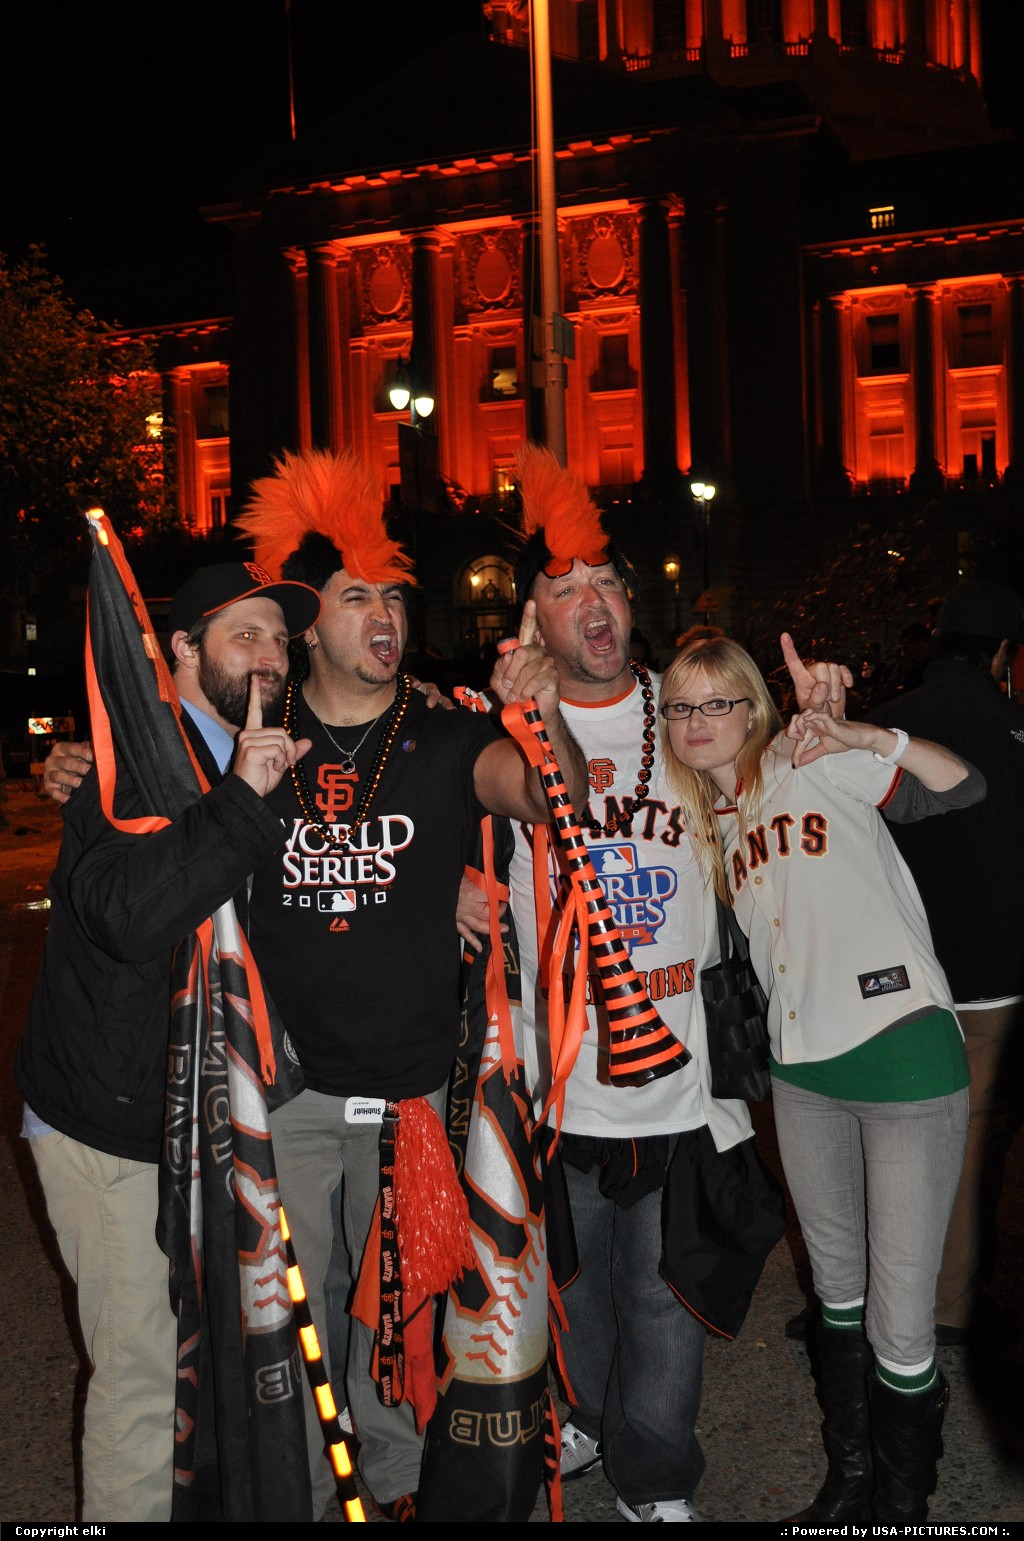 Picture by elki: San Francisco California   giants world series 2010